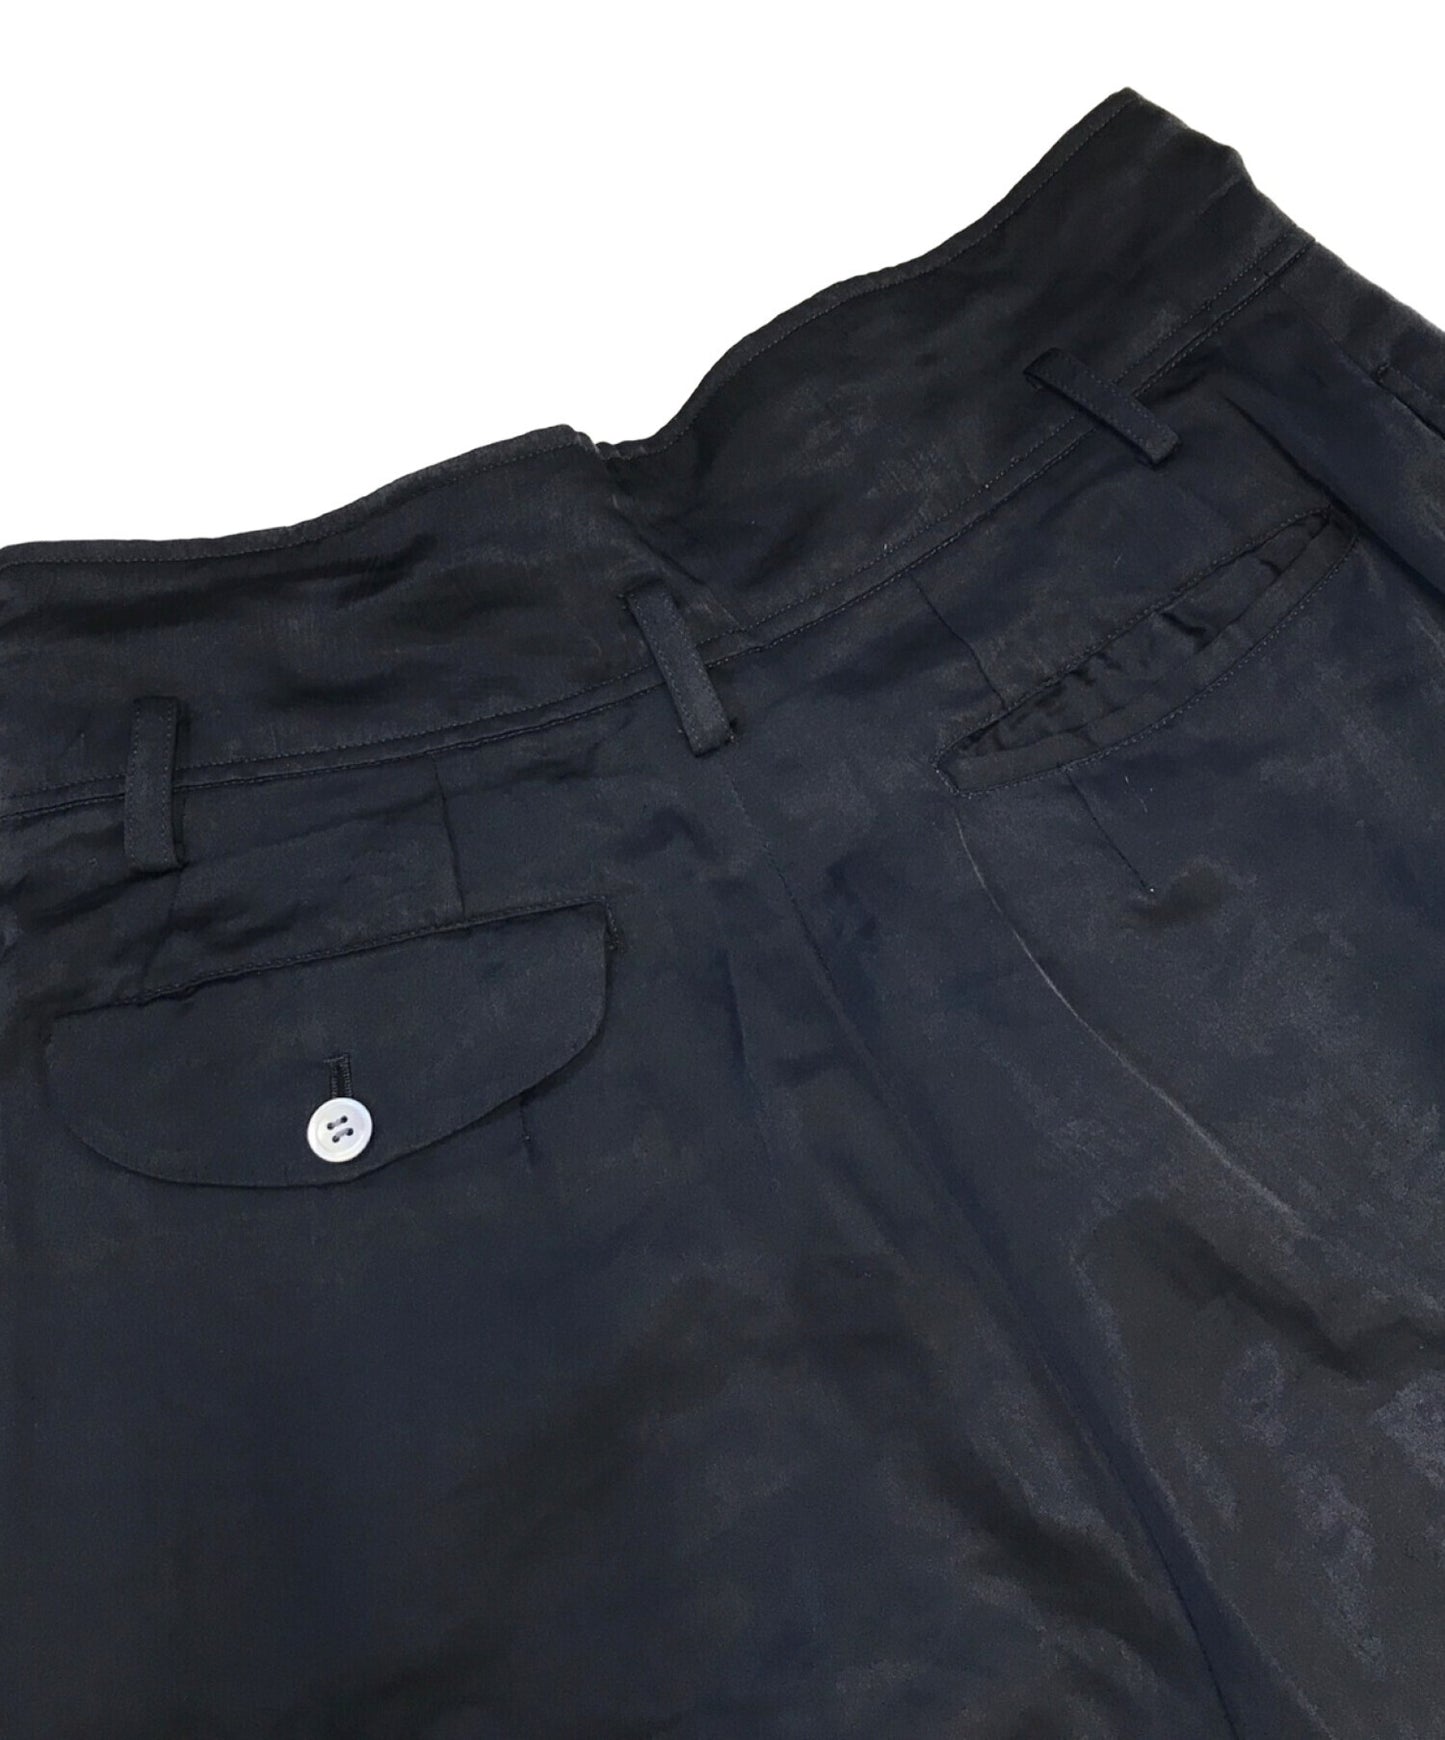 Comme des Garcons [Old] High Waist 2-Tucked Shorts GP-11048M